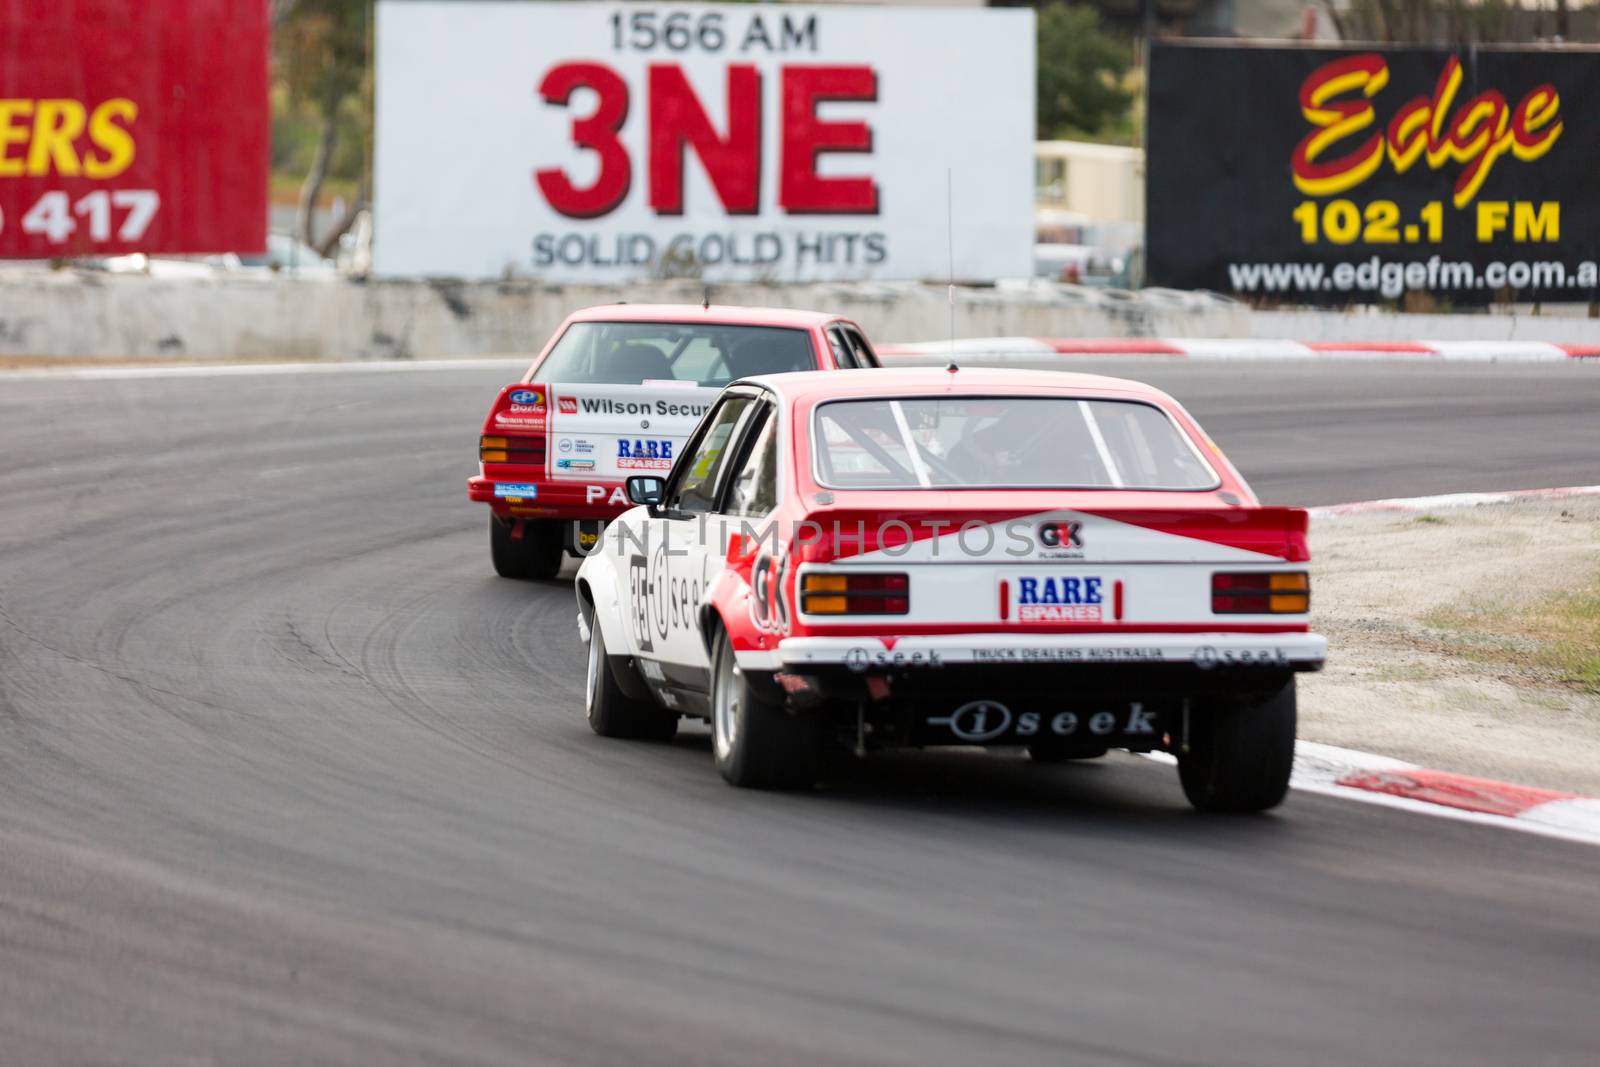 MELBOURNE, WINTON/AUSTRALIA, 22 MAY , 2016: Classic race cars rouding turn 1 at Winton.